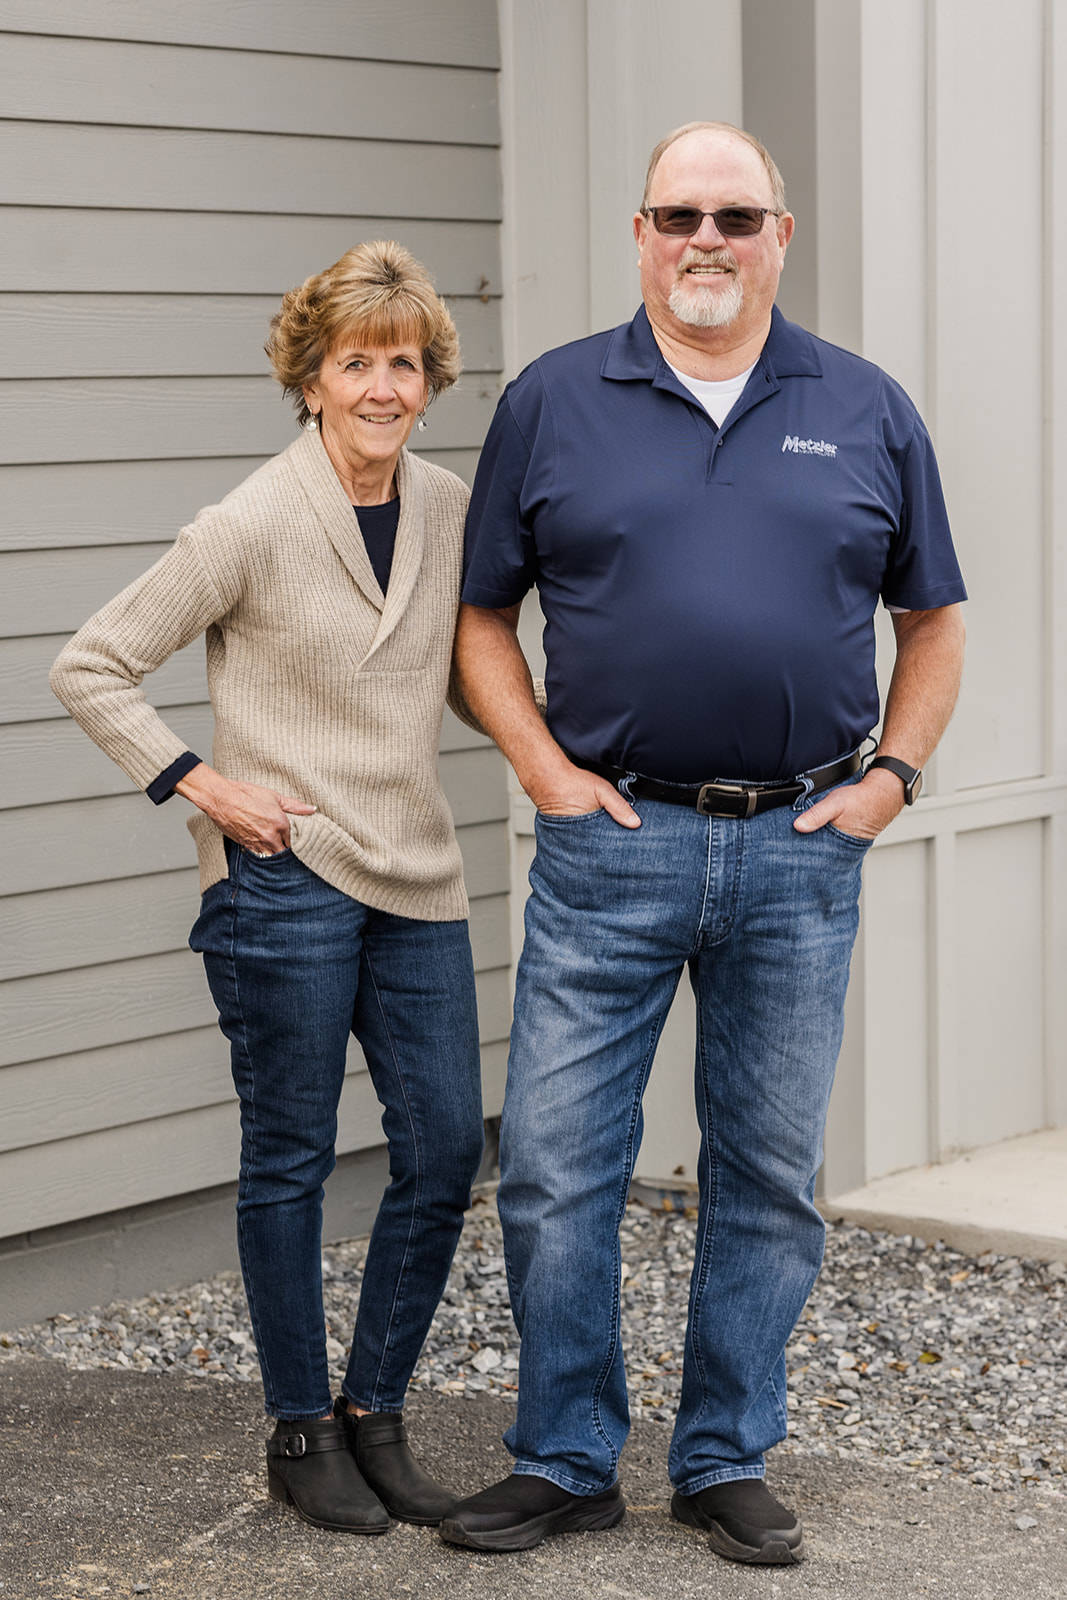 dan and janet metzler - president and office manager